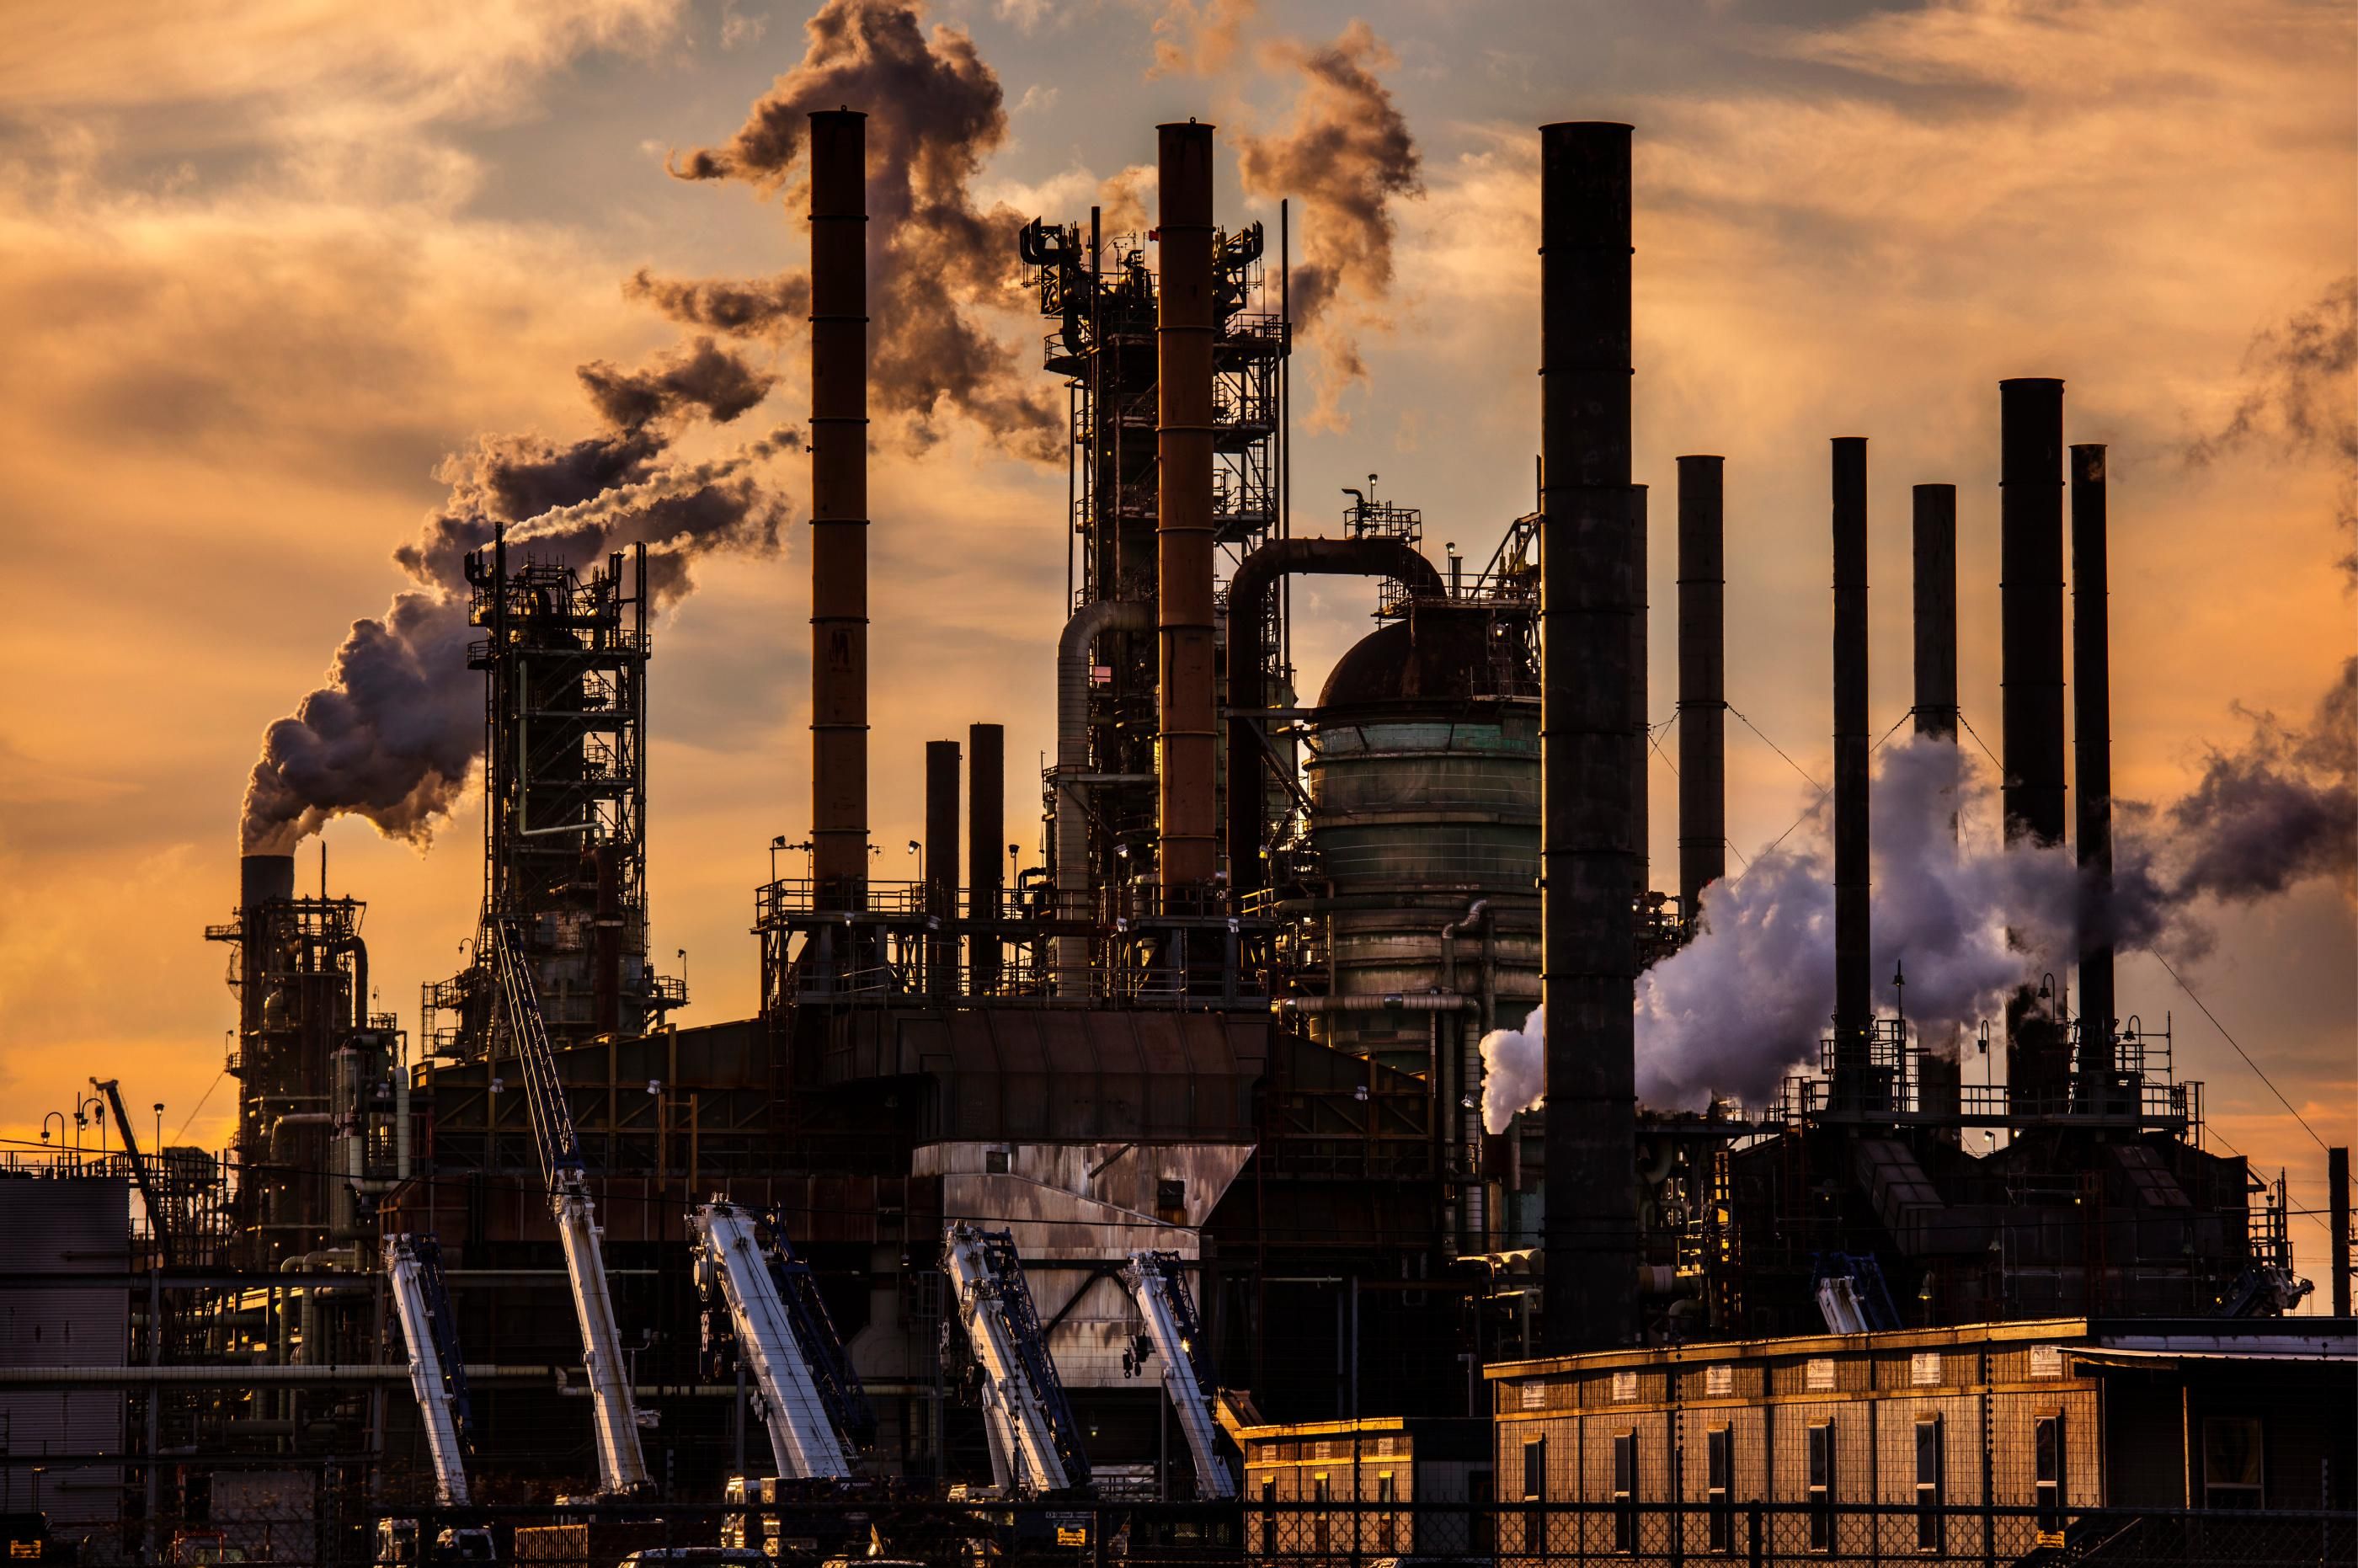 An ExxonMobil oil refinery, the second largest in the U.S., is pictured on February 28, 2020 in Baton Rouge, Louisiana. (Photo: Barry Lewis/InPictures via Getty Images)